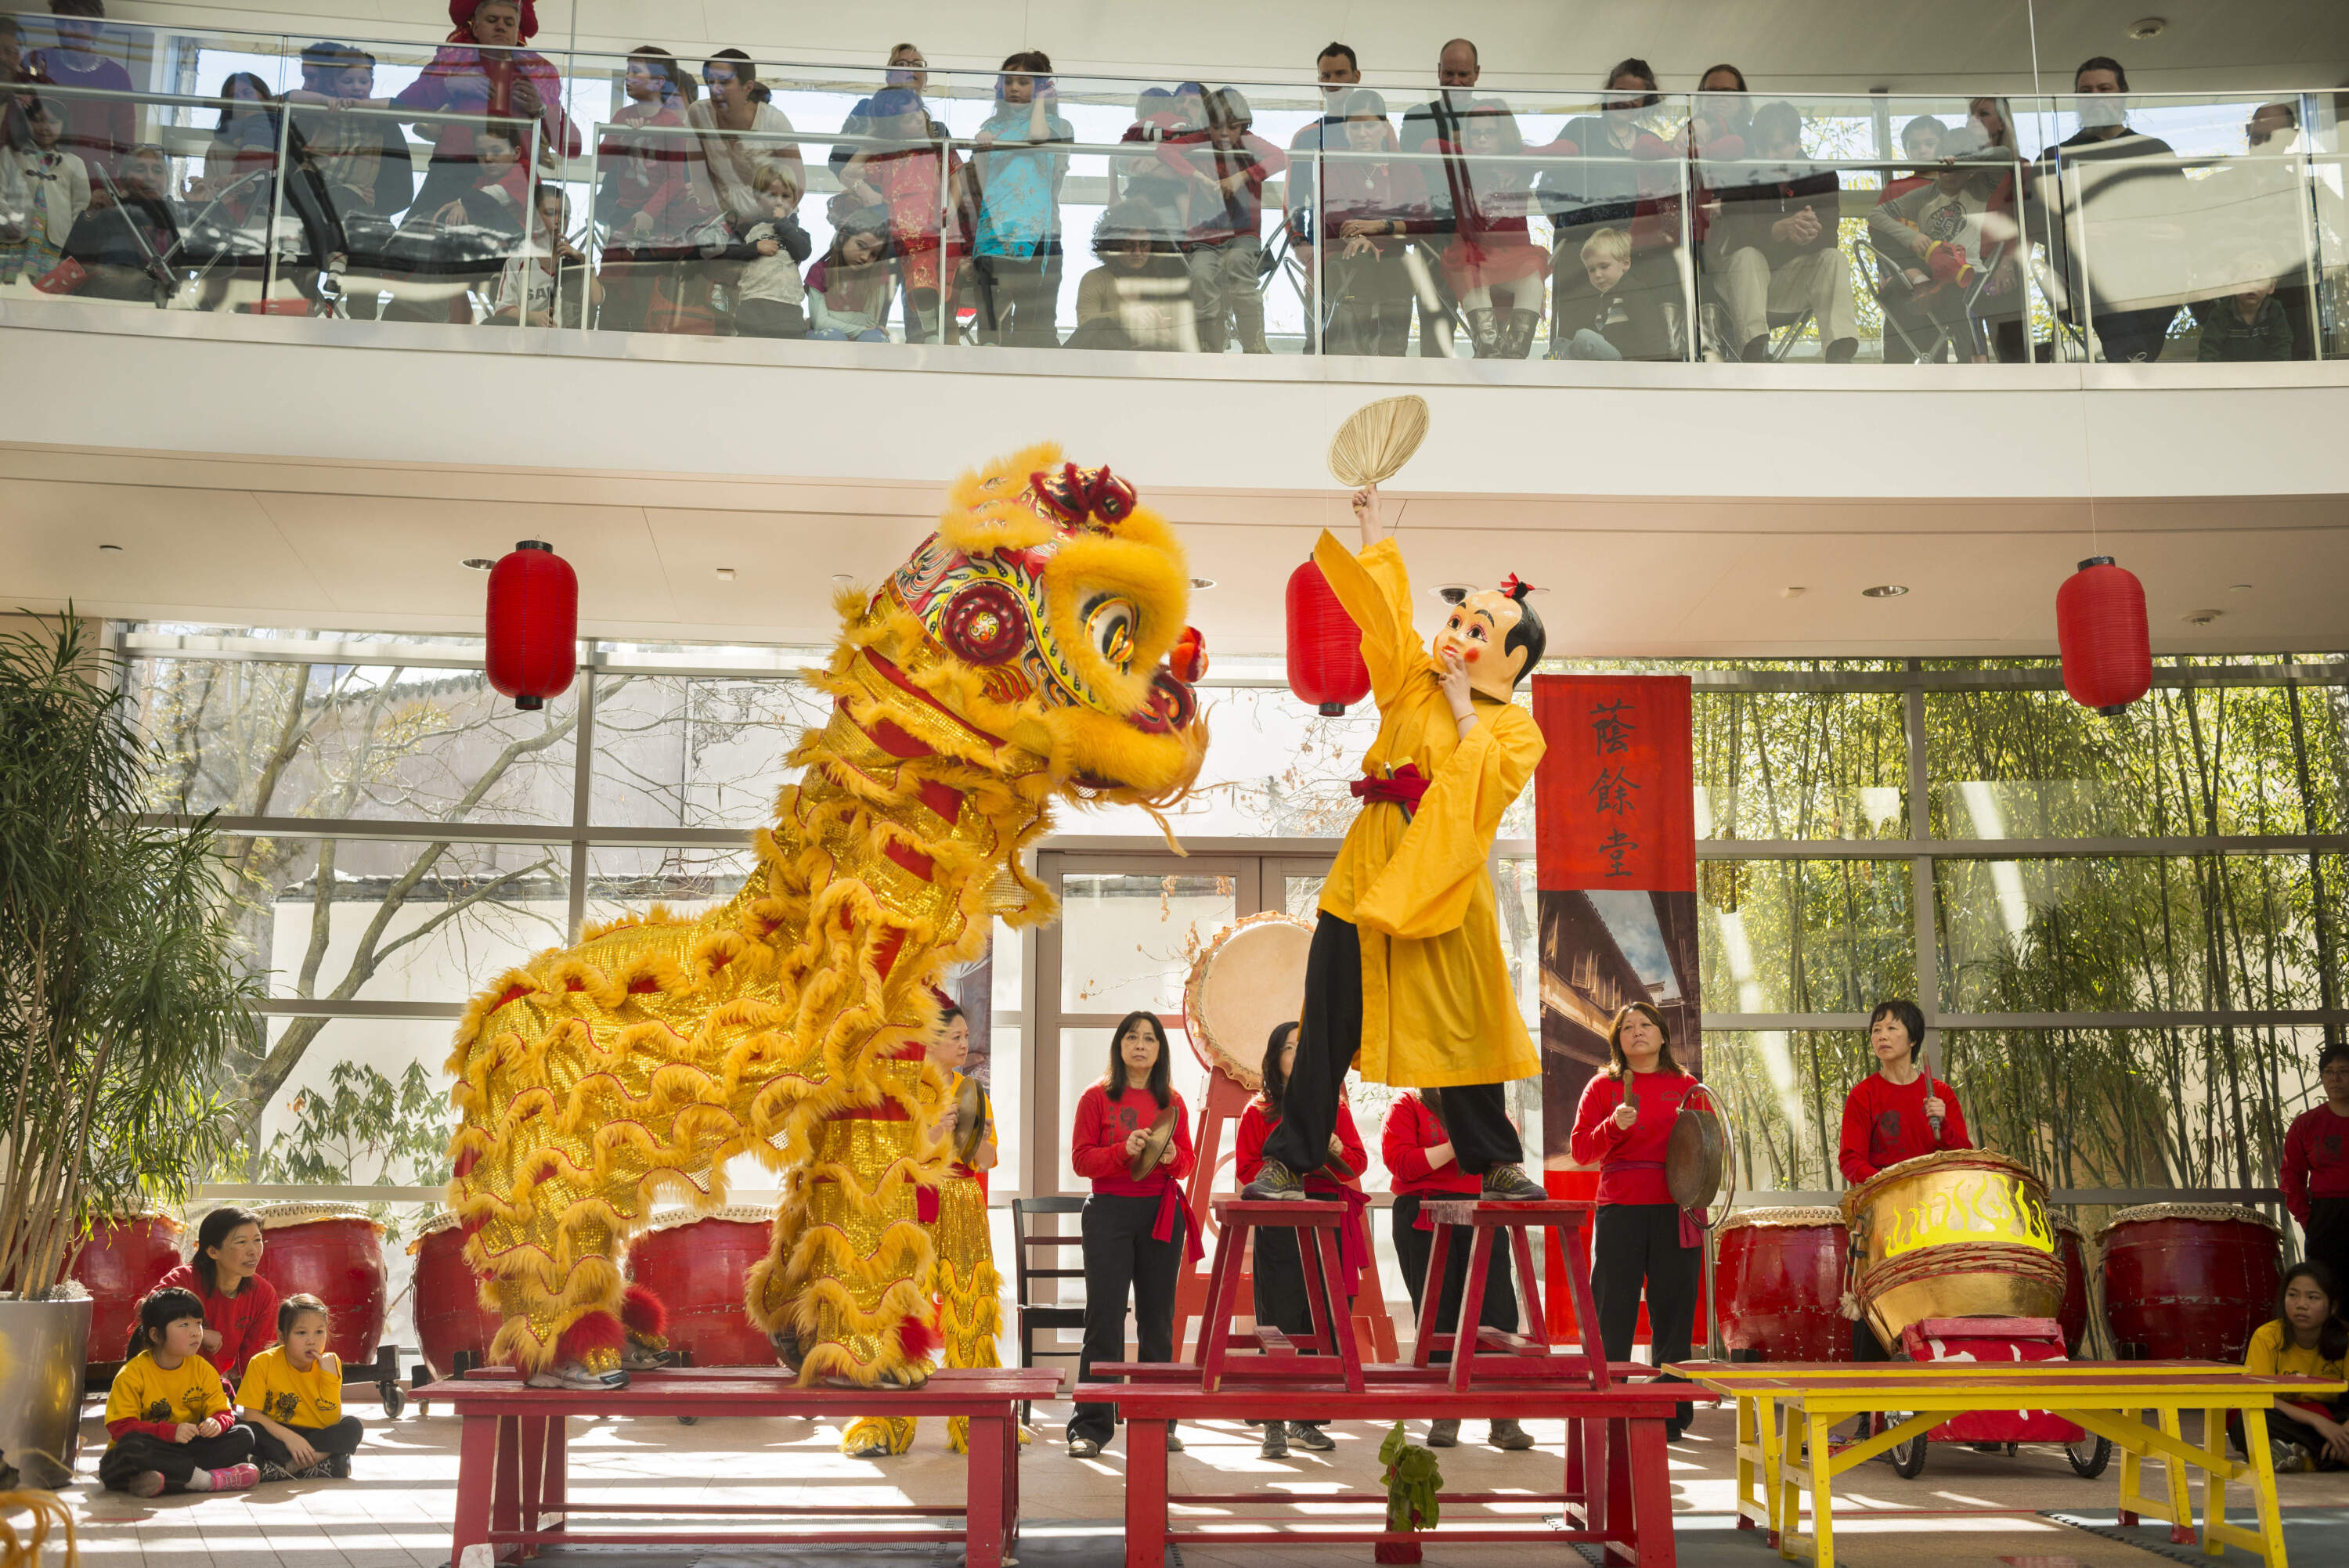 8 ways to celebrate Lunar New Year in Greater Boston